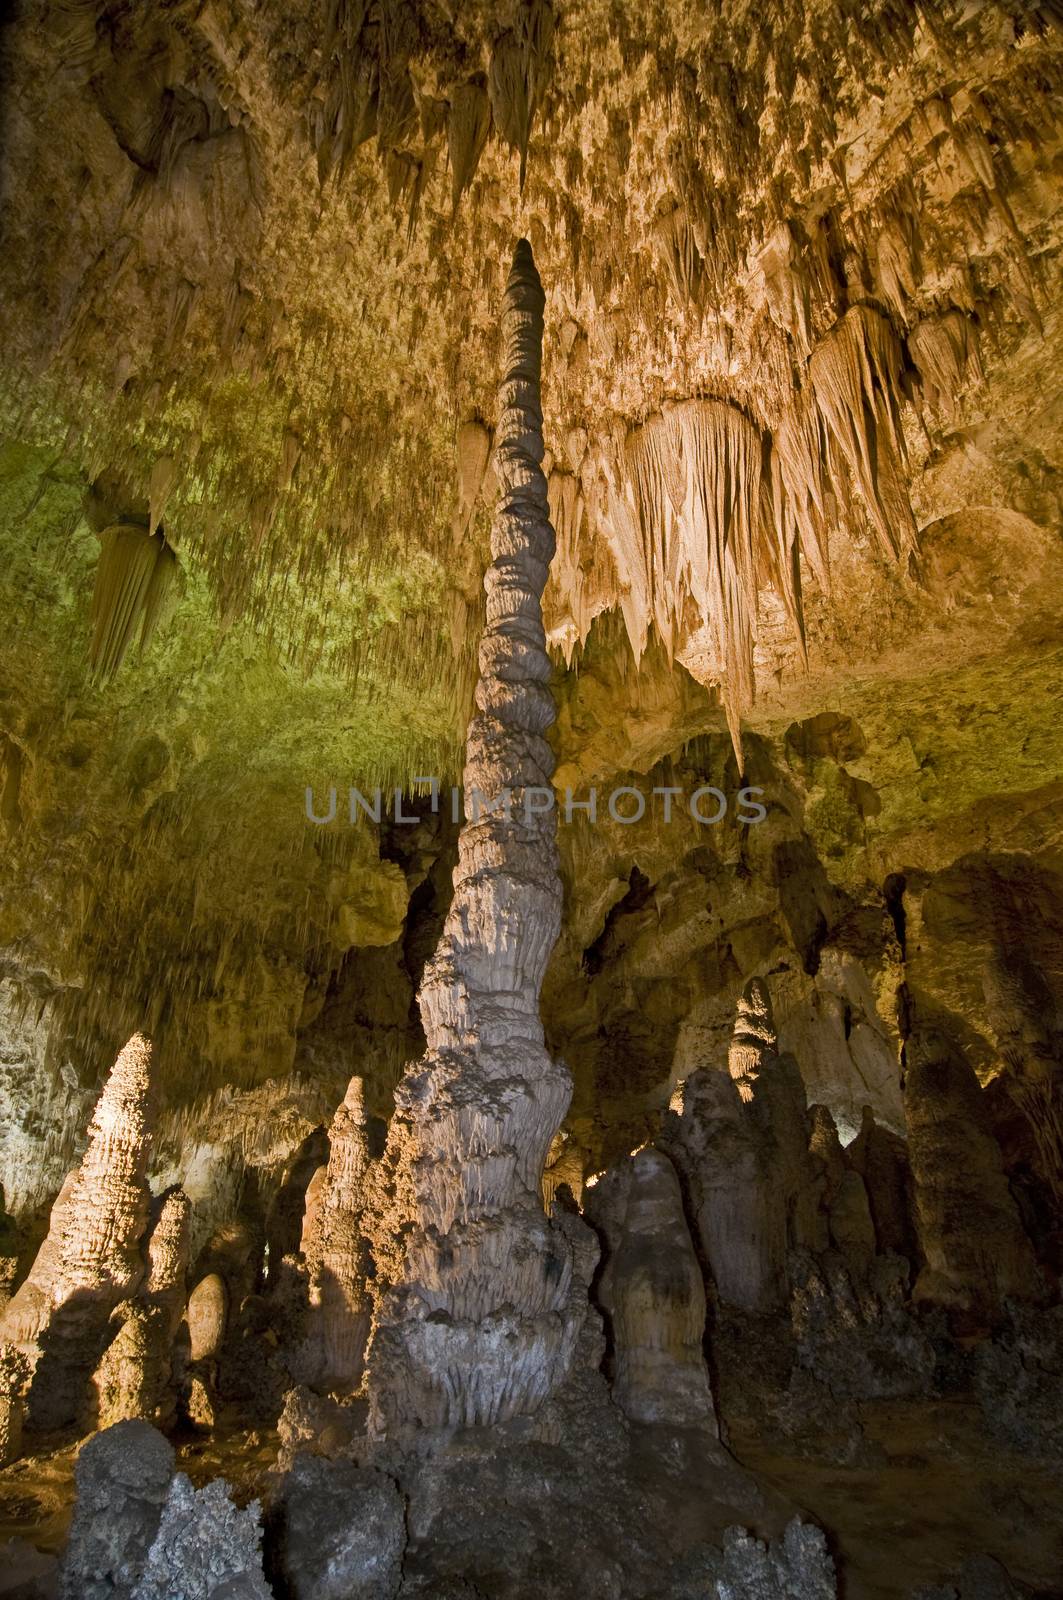 The 'Totem Pole' in the Big Room in Carlsbad Caverns, NM